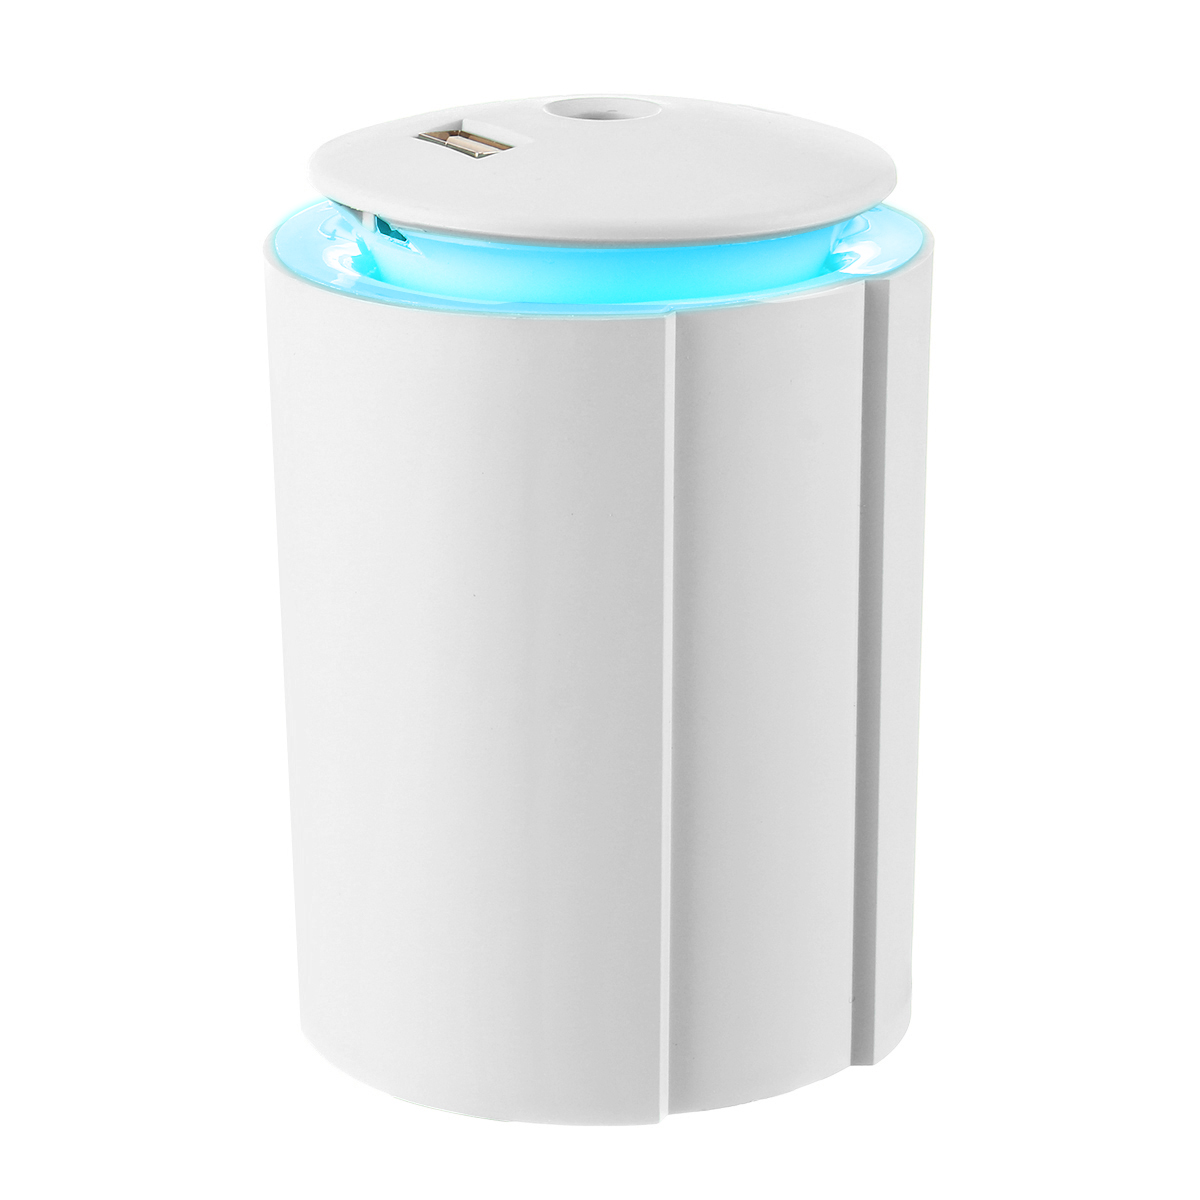 260ml-5V-Mini-Air-Humidifier-Night-Light-Portable-USB-Charging-Mute-Touch-Dustproof-for-Home-Office--1758526-8